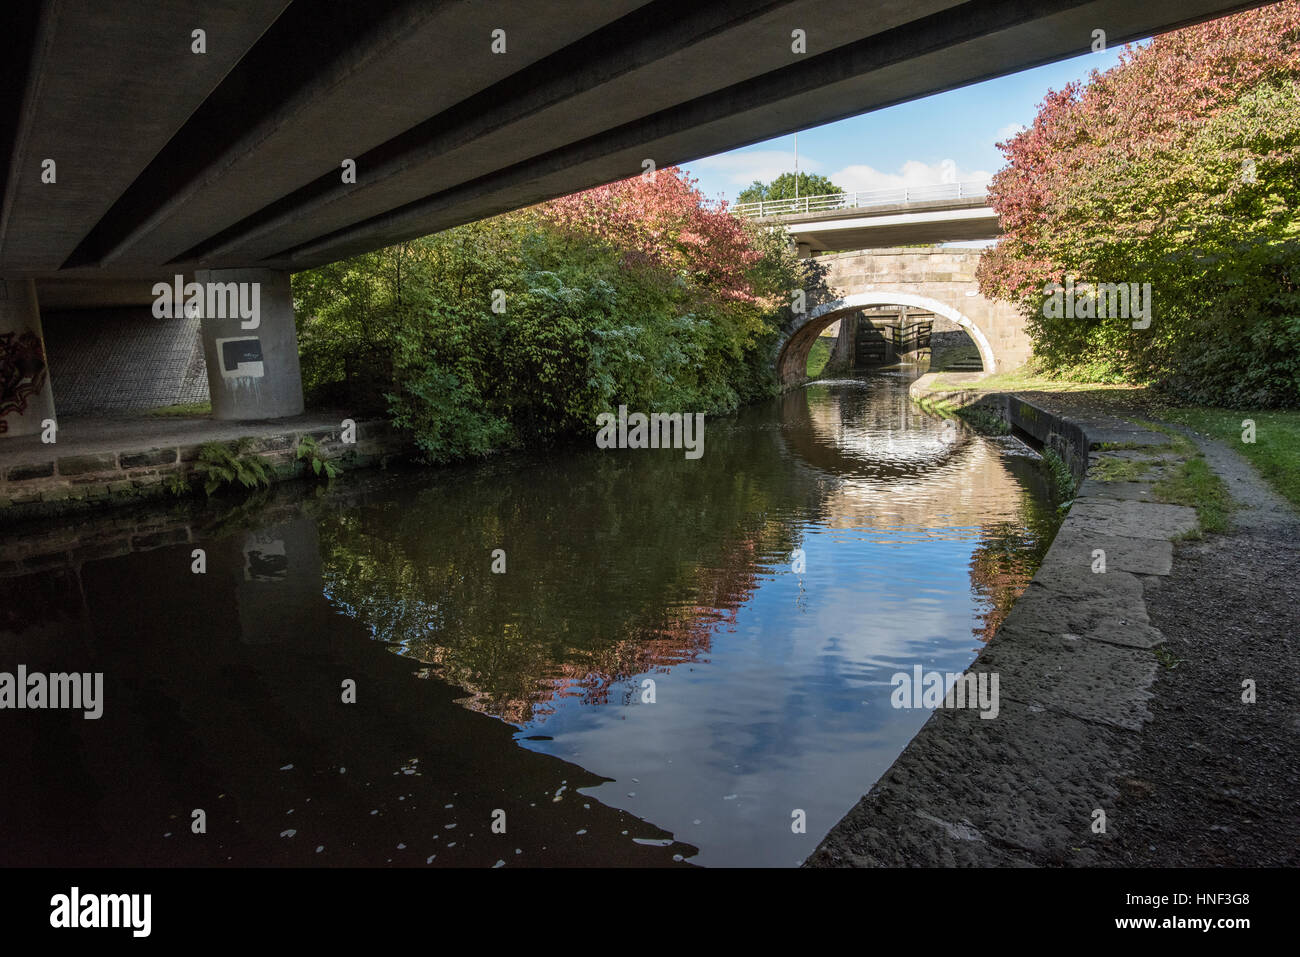 Modern concrete motorway and old stone road bridges over the Leeds Liverpool Canal at Barrowford, Lancashire Stock Photo